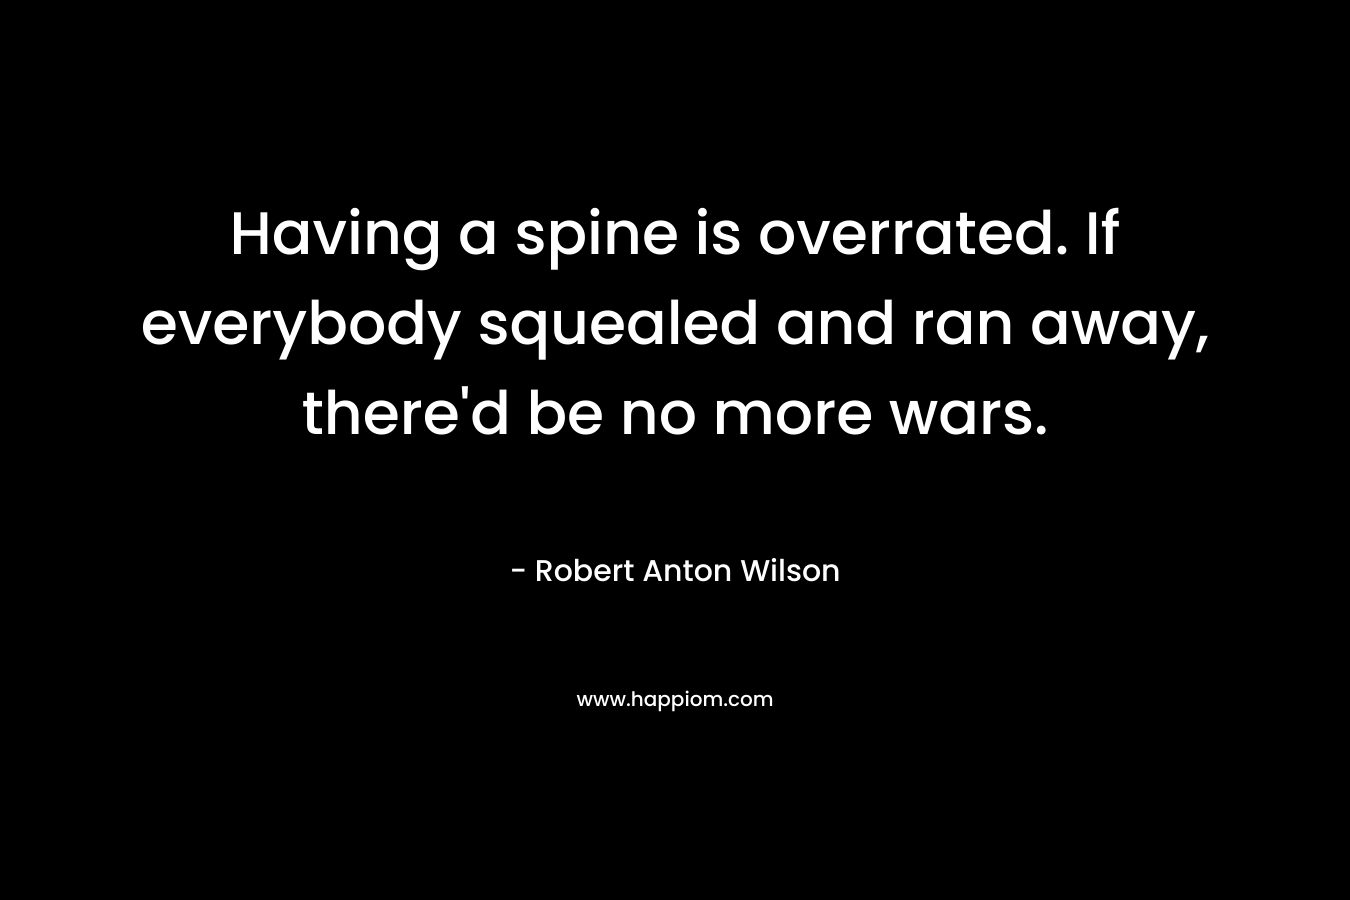 Having a spine is overrated. If everybody squealed and ran away, there'd be no more wars.